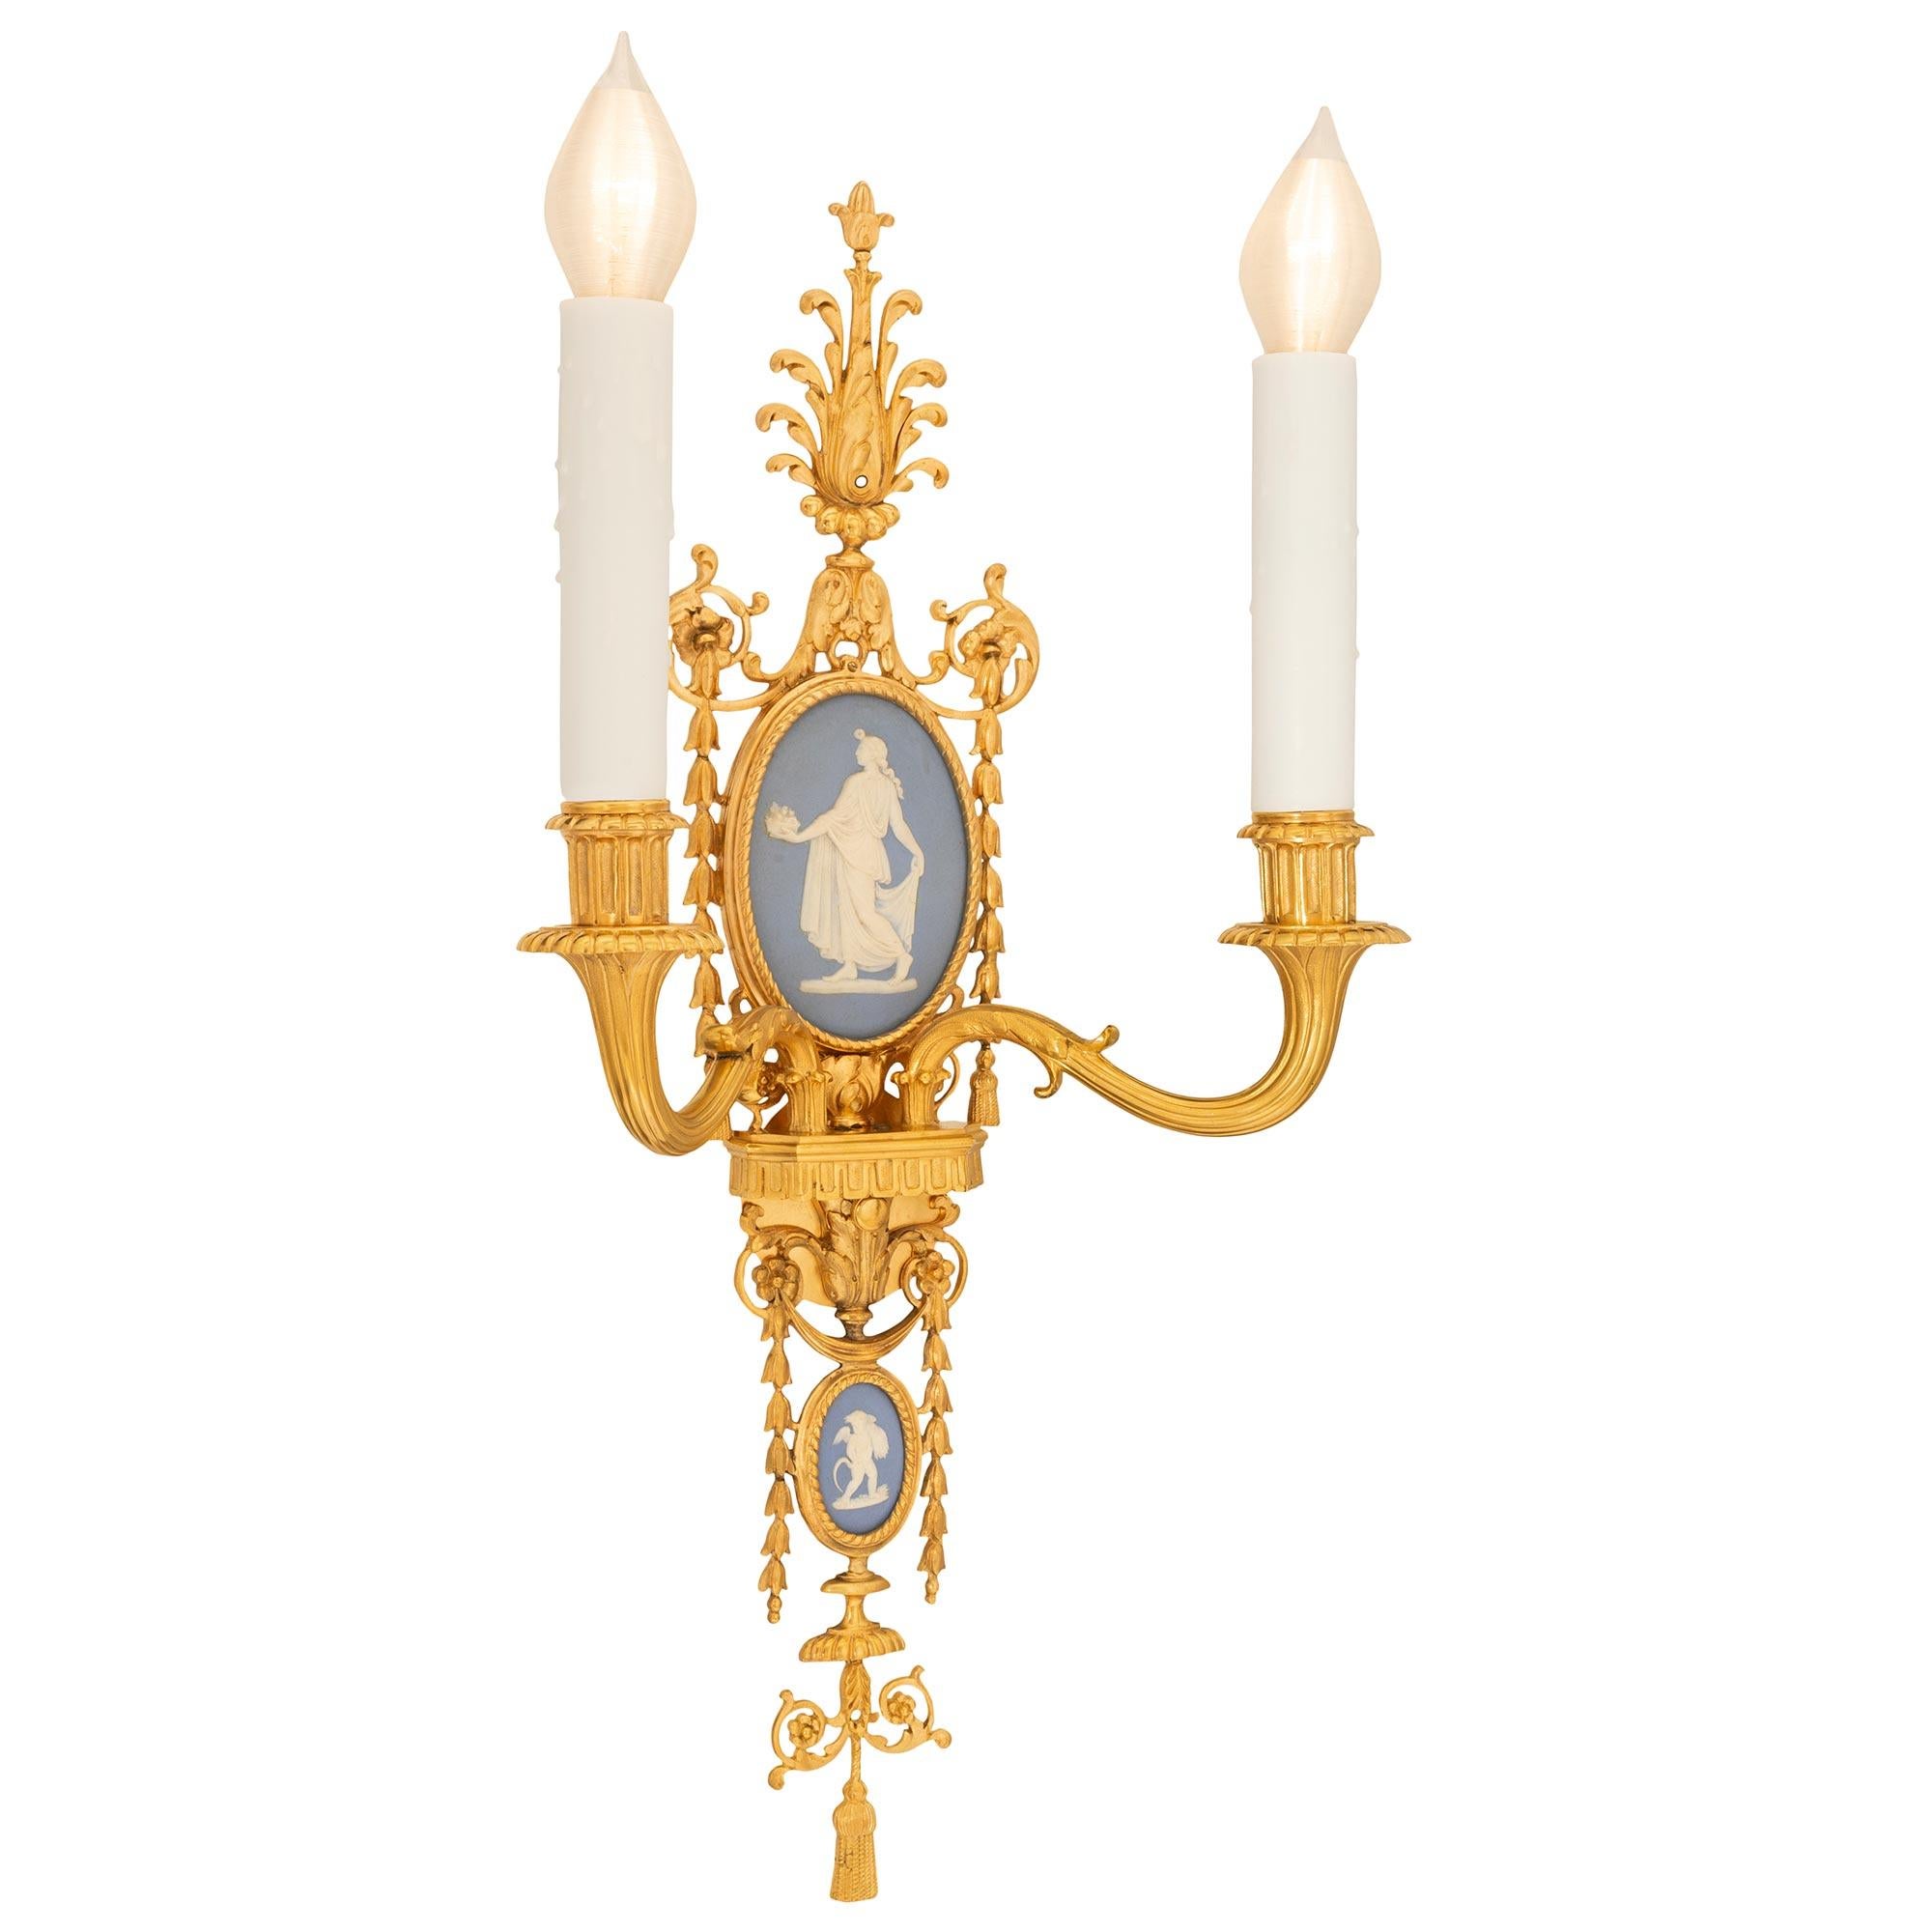 A remarkable and extremely decorative pair of American 19th century Louis XVI st. ormolu and Wedgwood sconces signed Caldwell. Each two arm sconce is centered by a charming tassel and beautiful scrolled Rinceau and reeded elements below fine fitted